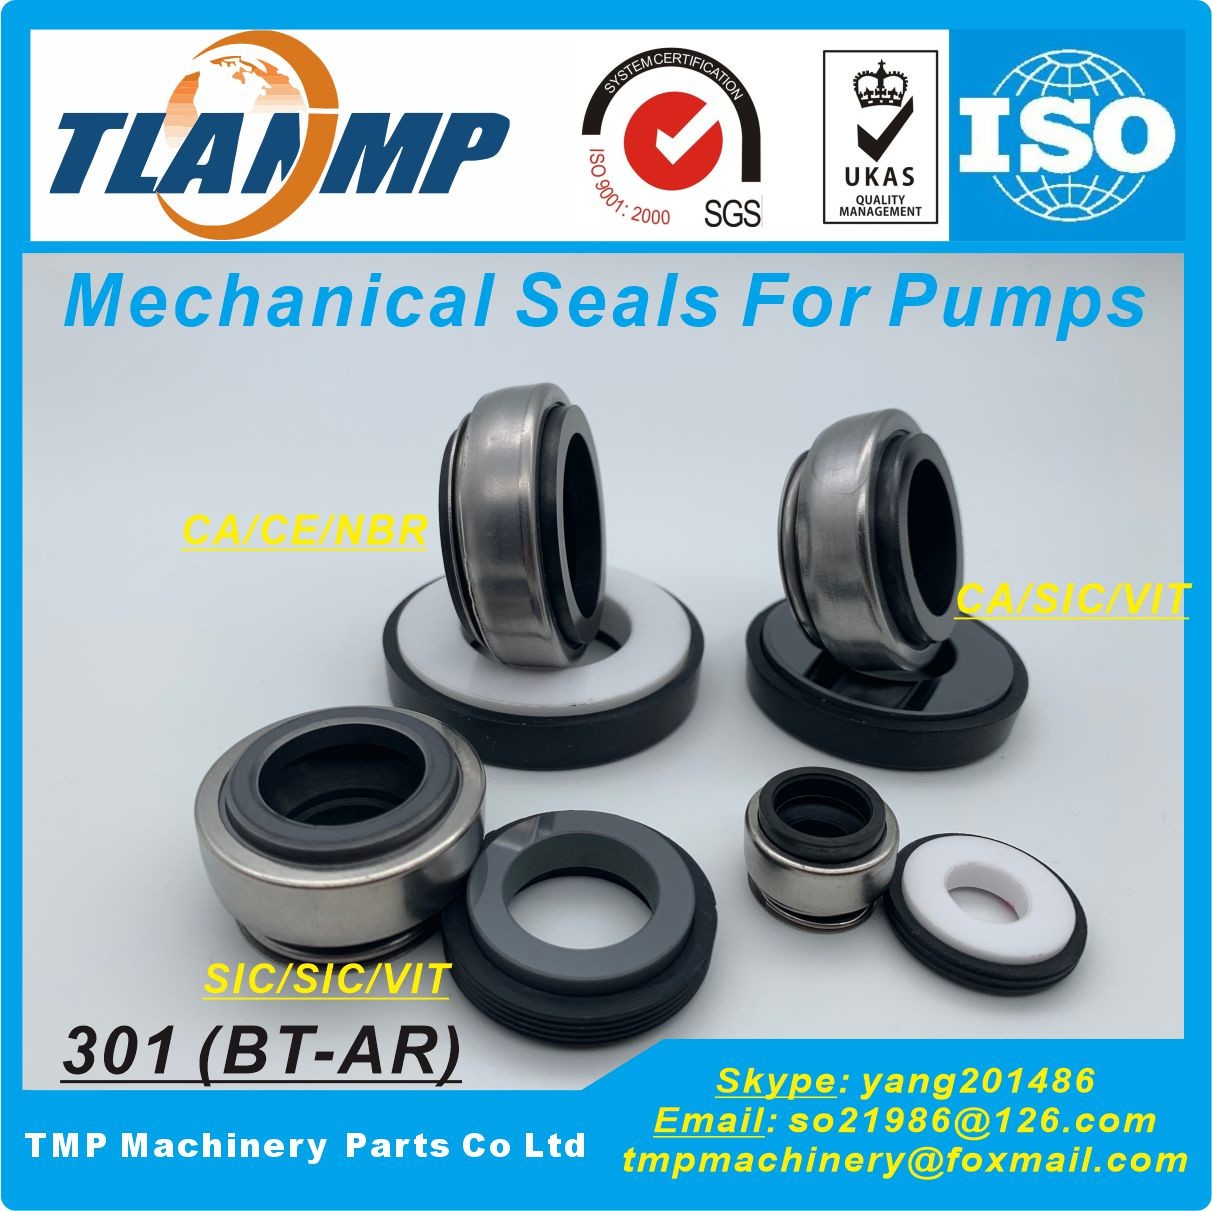 301-32 (BT-AR-32) TLANMP Mechanical Seals For Water Pumps|Equivalent to  BTAR Seal